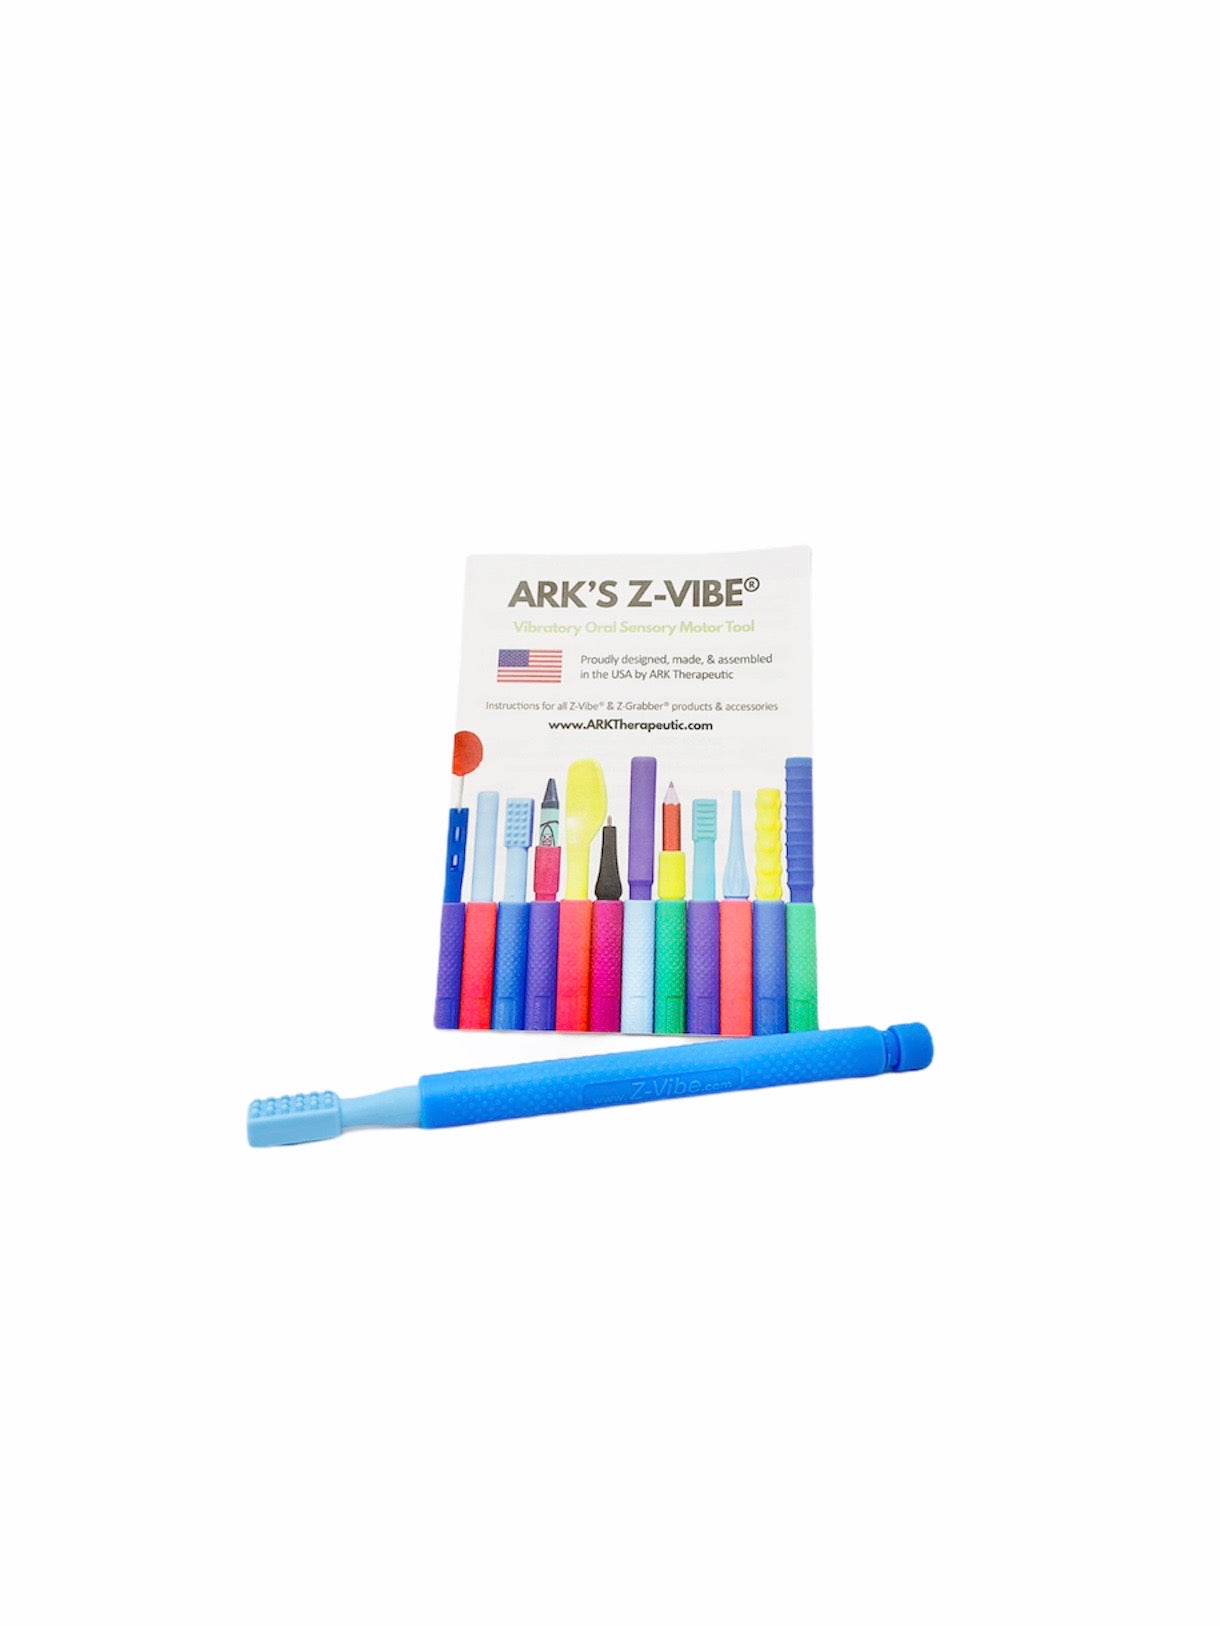 Ark Z-VIBE® tool laid in front of packaging with white background